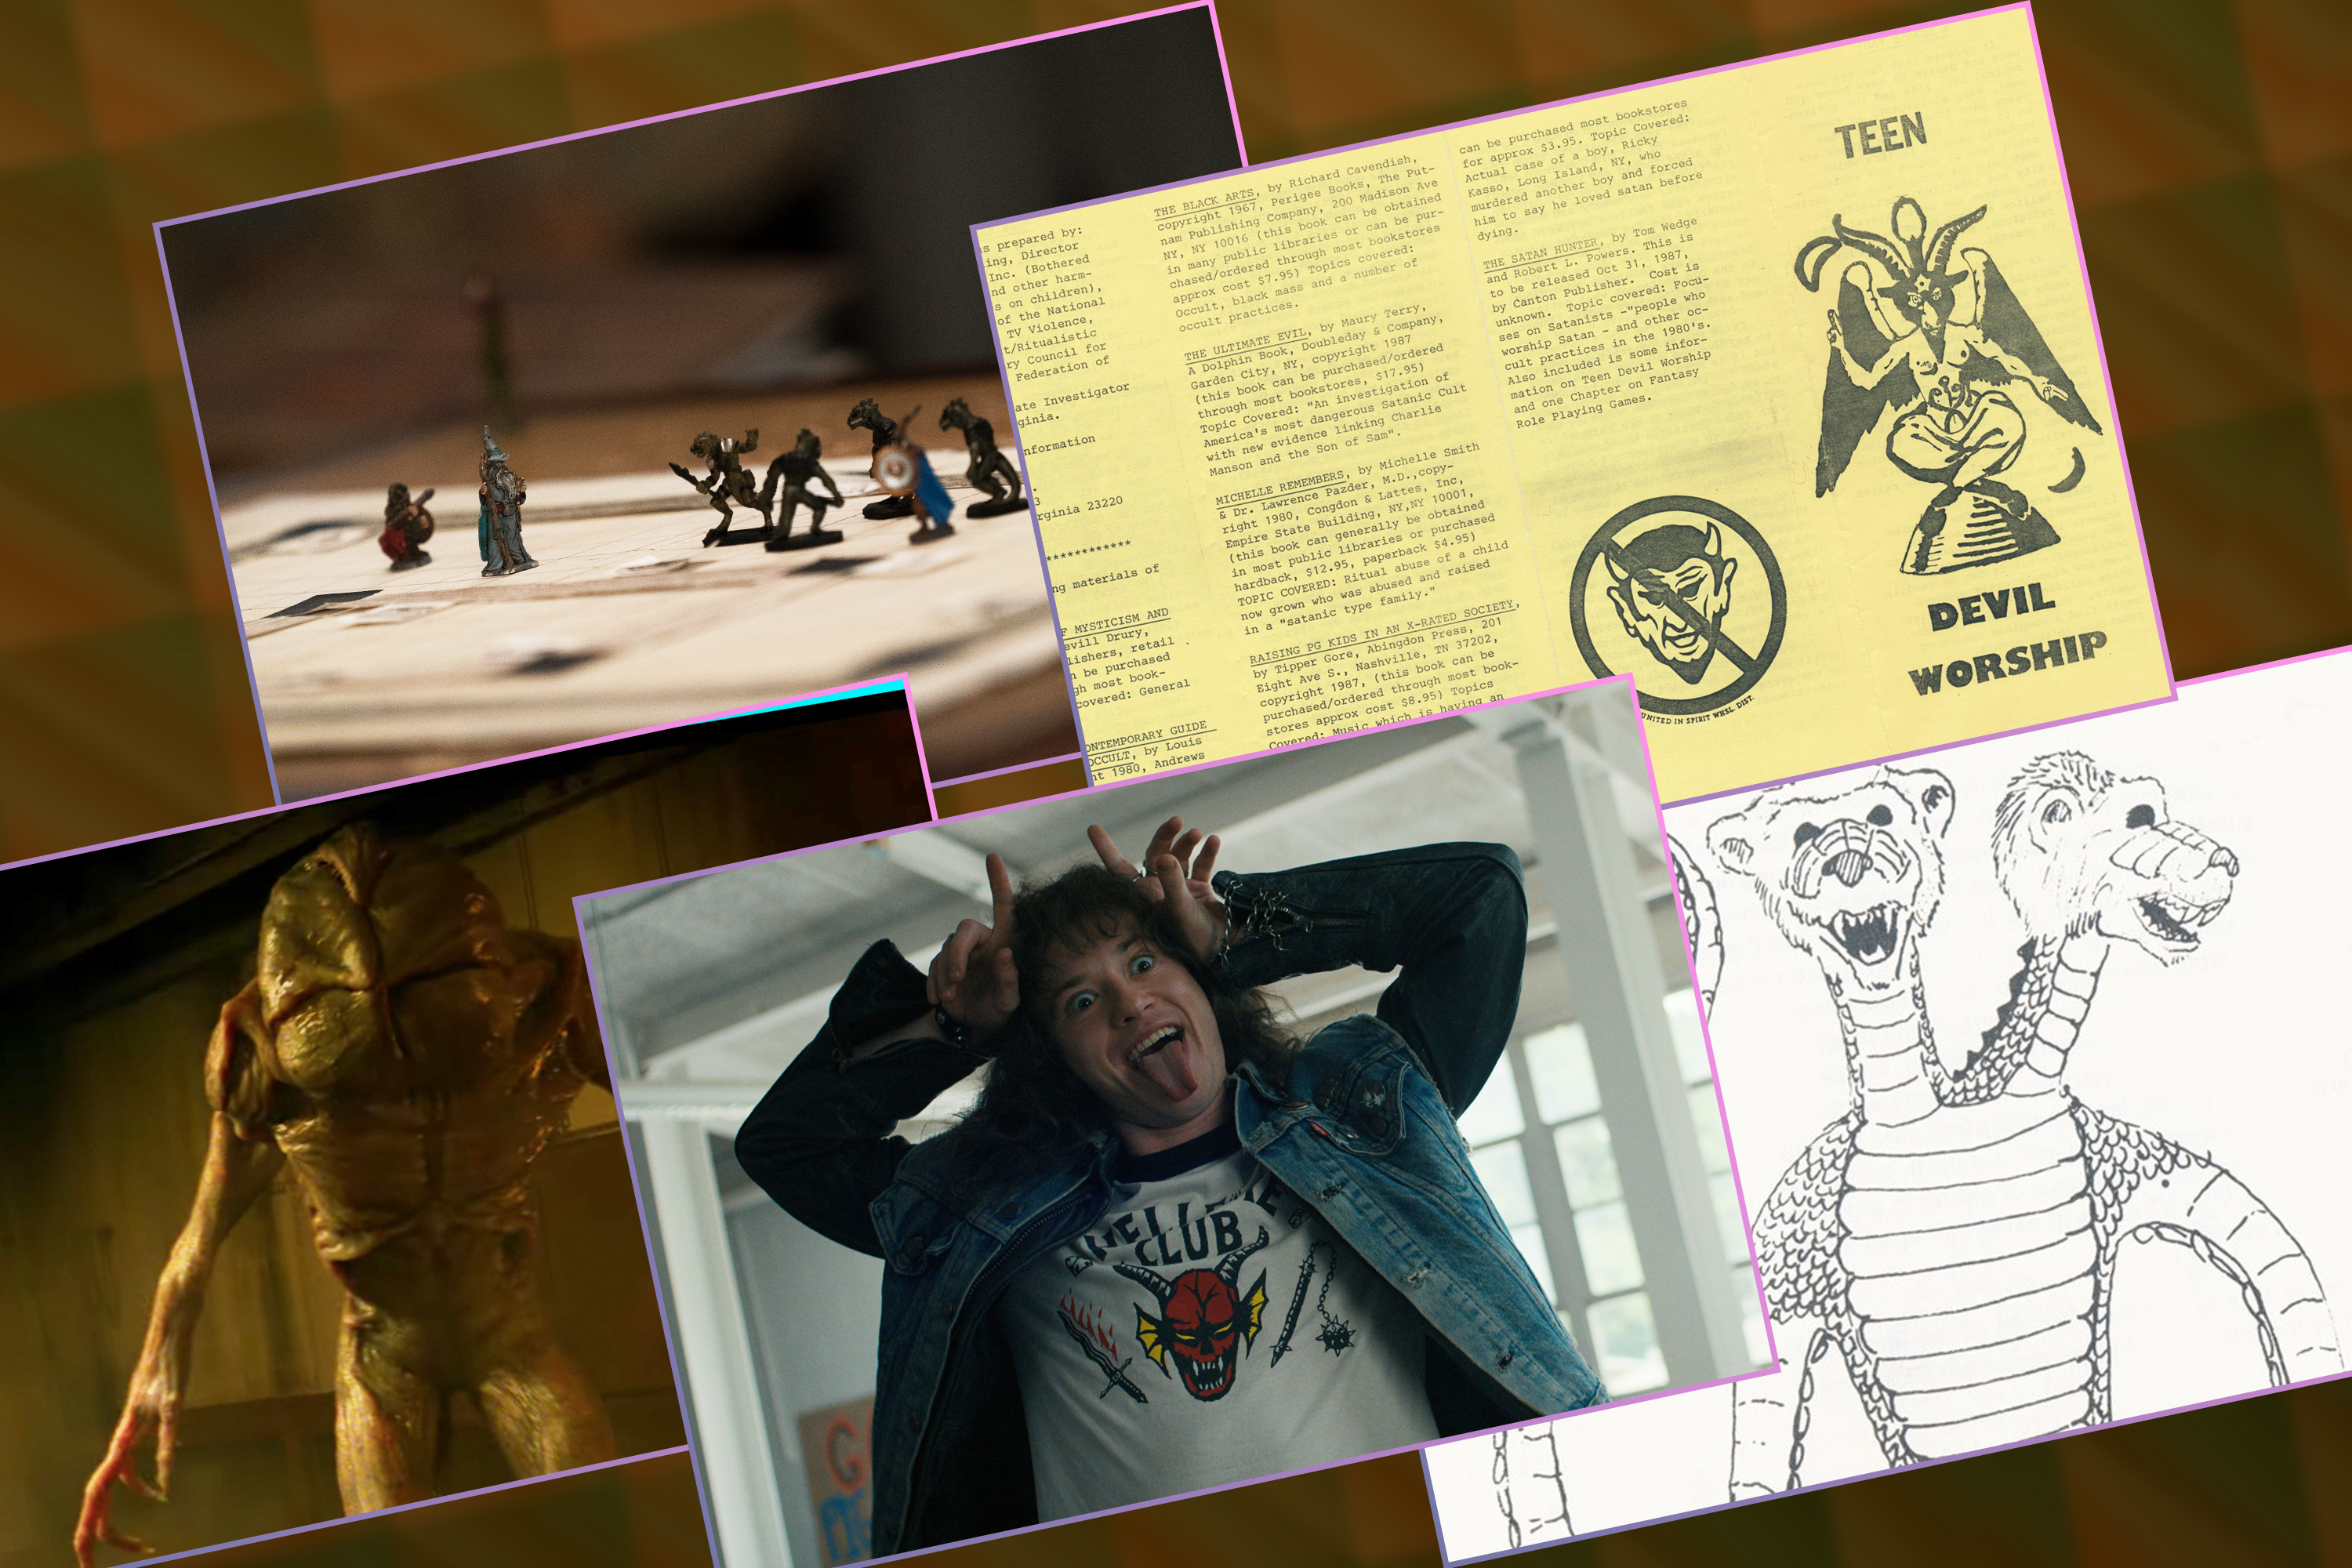 A collage of Stranger Things images, alongside old D&amp;D and Satanic Panic materials